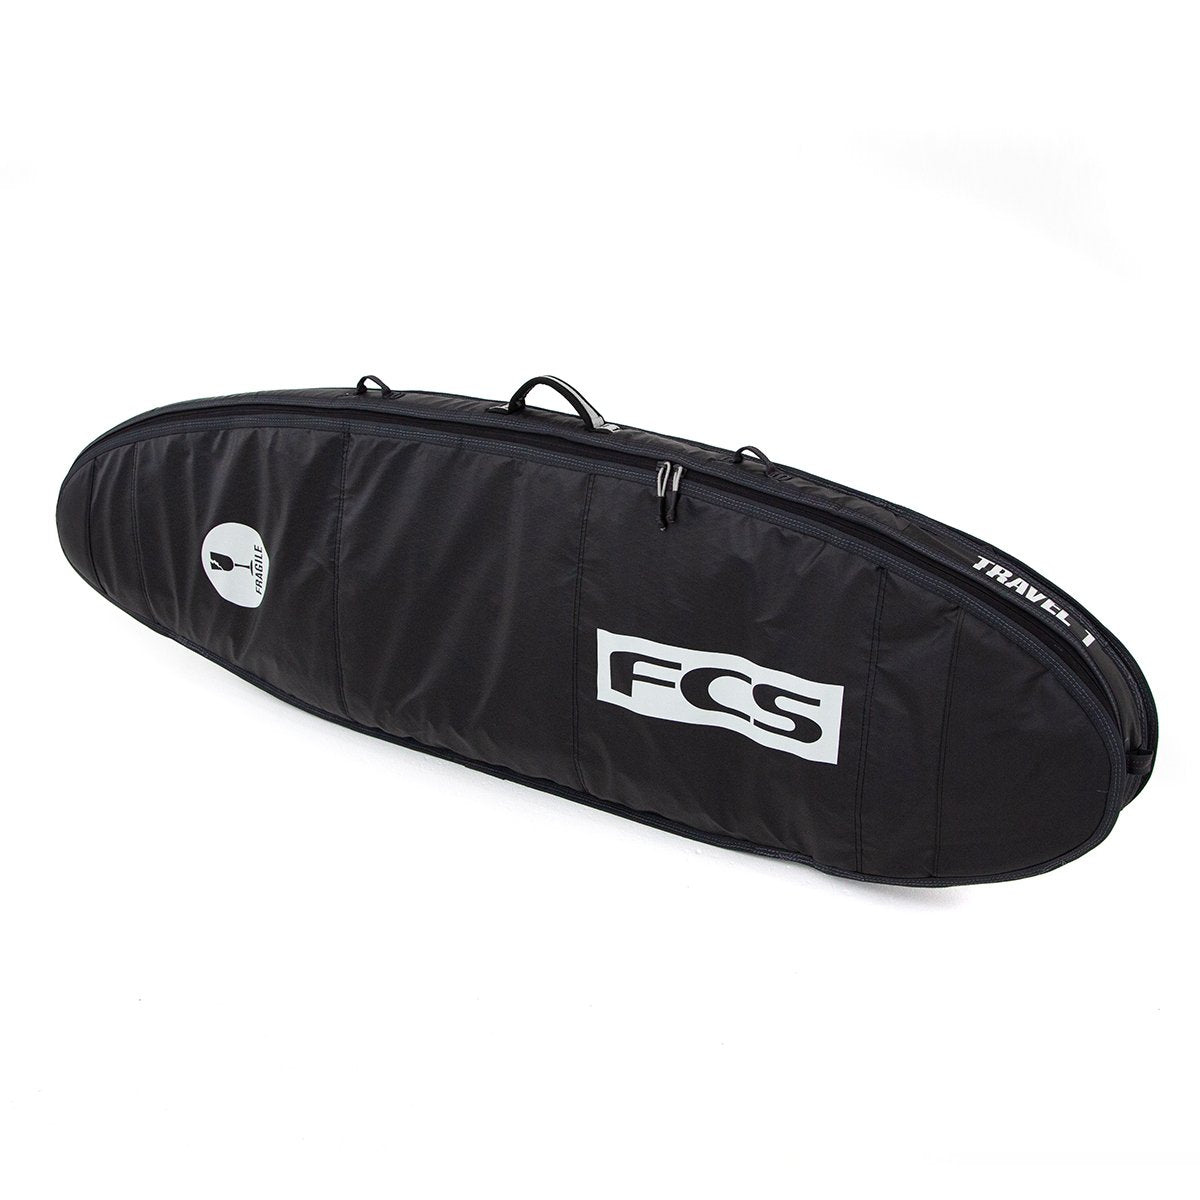 6'0" FCS Travel 1 All Purpose Surfboard Cover